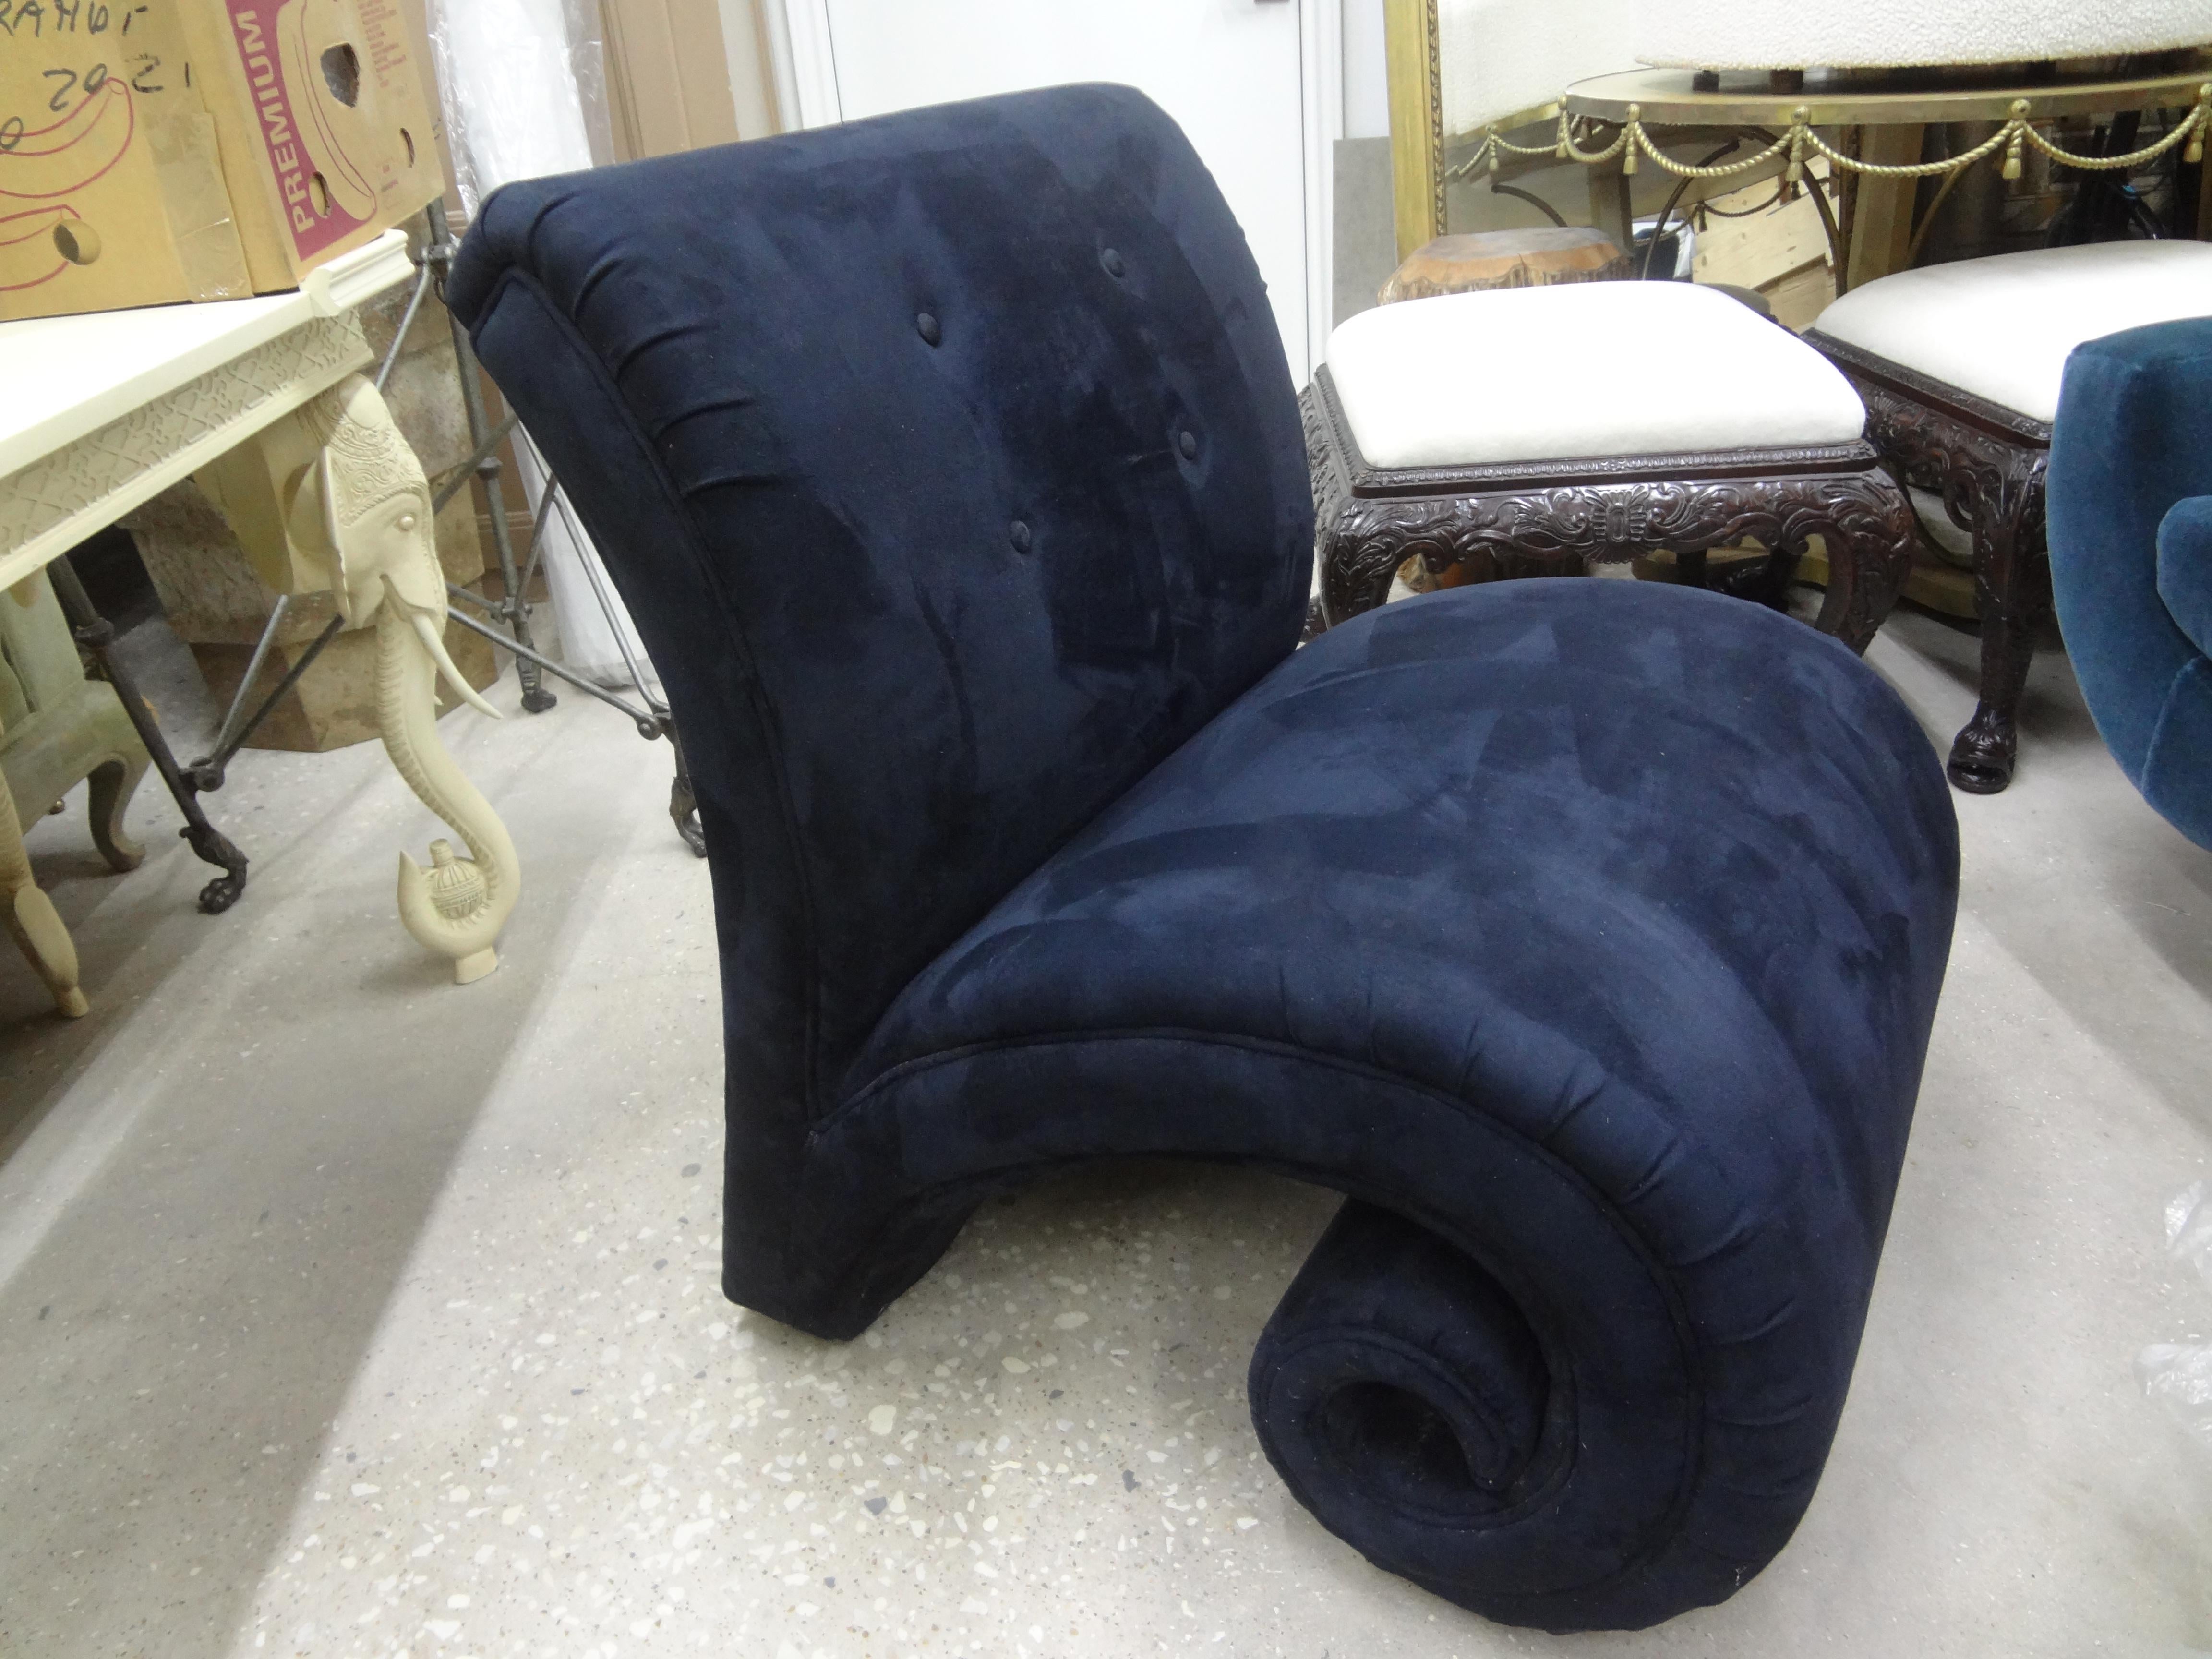 Postmodern sculptural scroll lounge chair. This stunning modernist lounge chair which terminates in an interesting scroll or curl design is extremely comfortable and beautiful from every angle. Currently in its original navy blue ultrasuede fabric